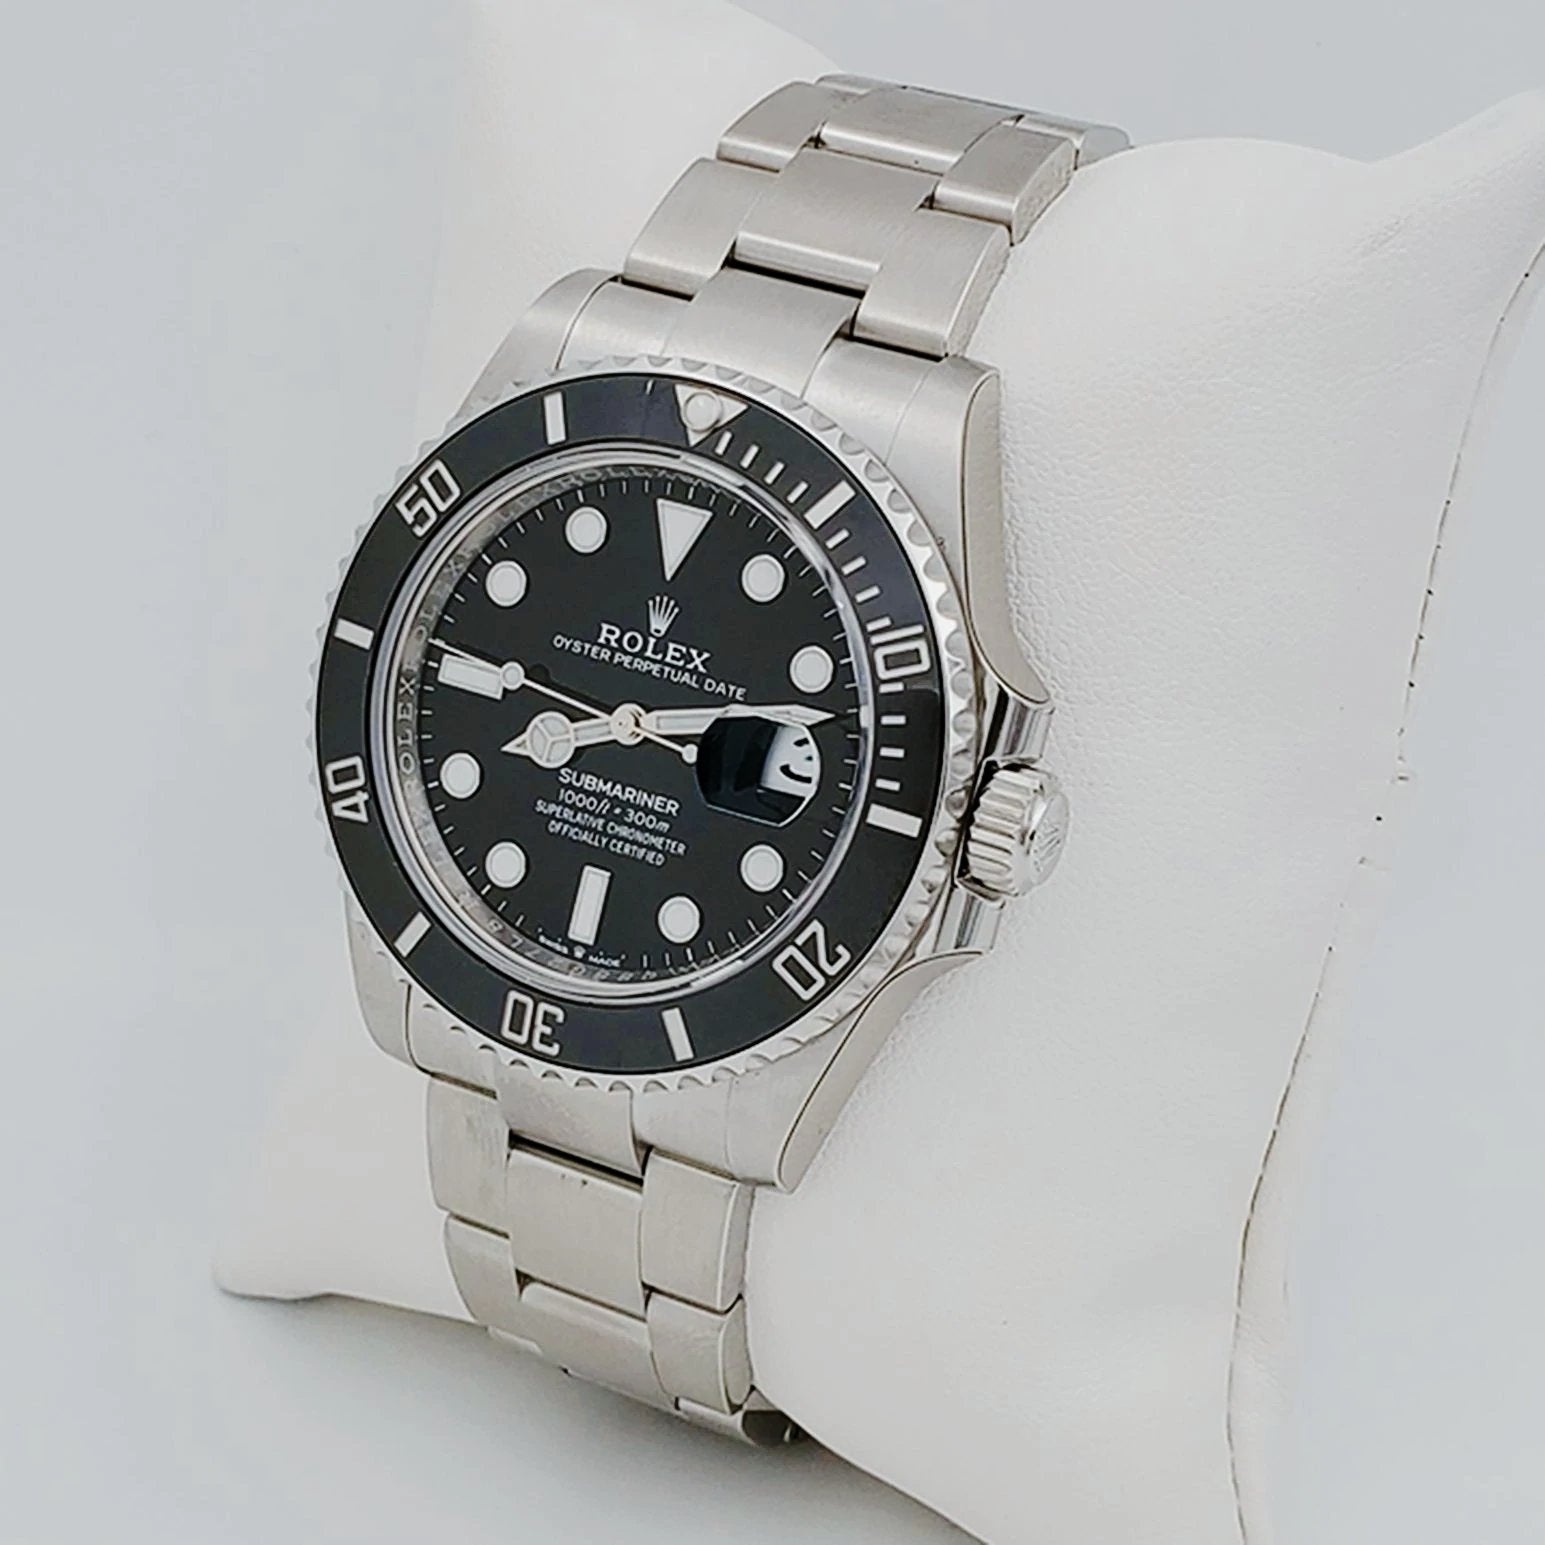 Stainless steel Rolex Oyster Perpetual submariner #2923